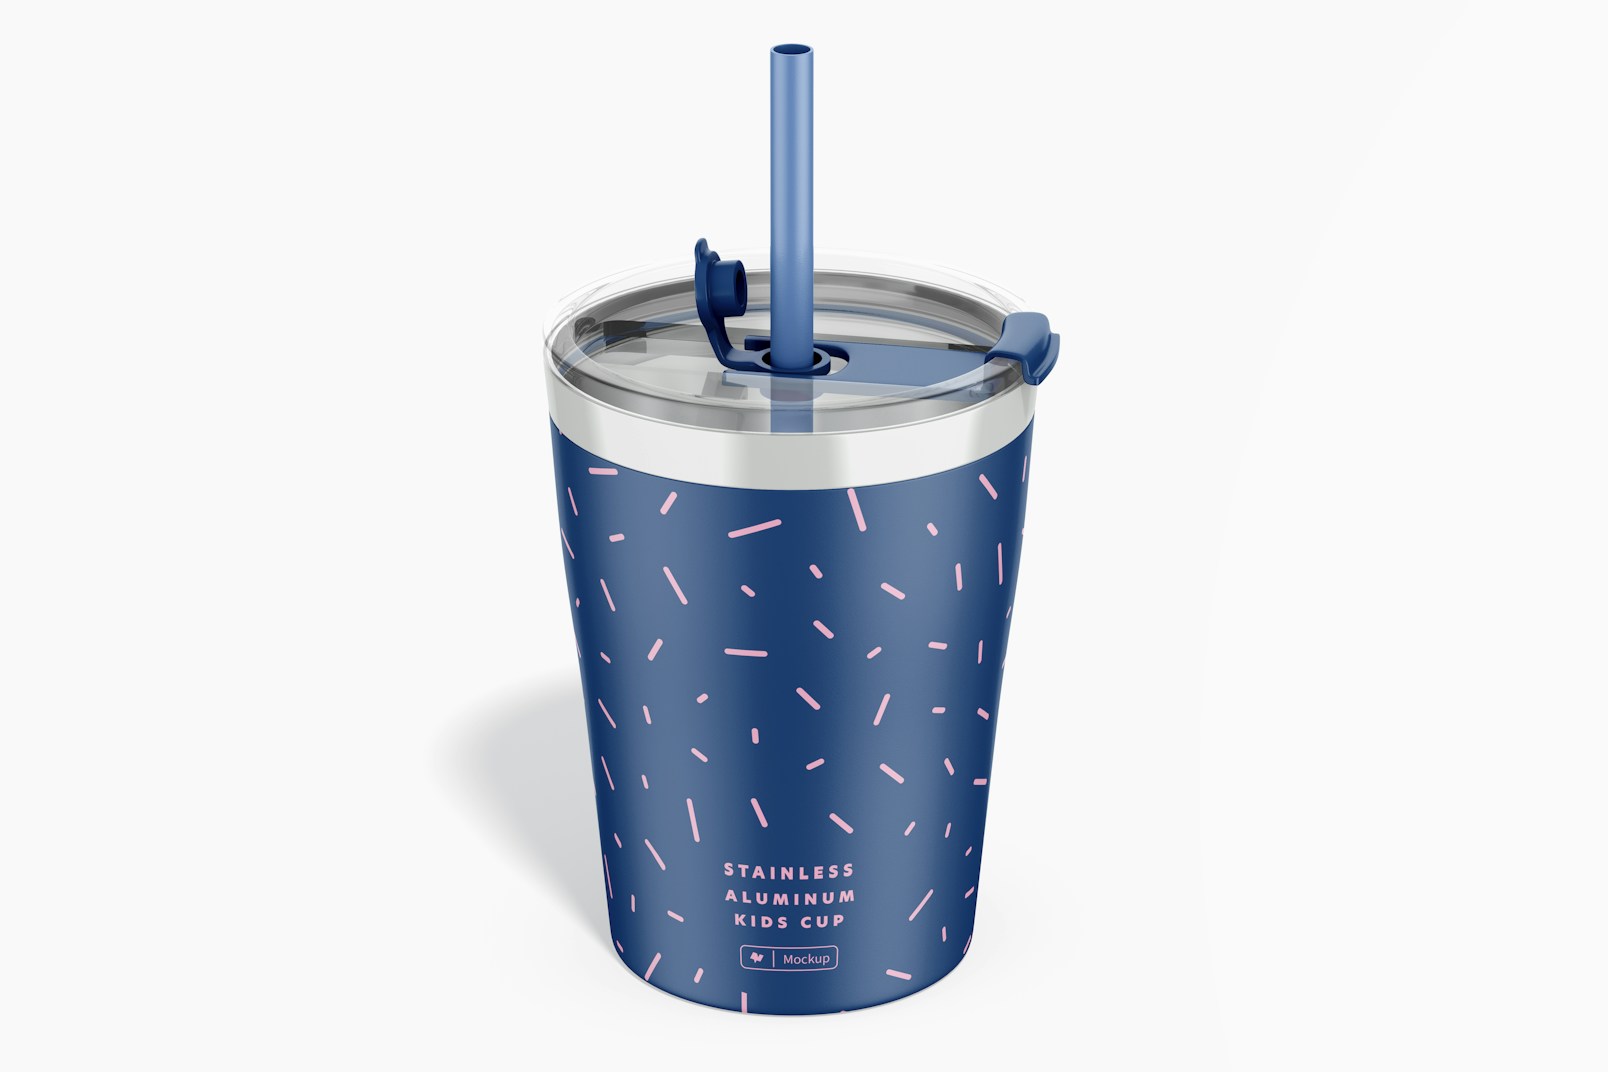 Stainless Aluminum Kids Cup Mockup